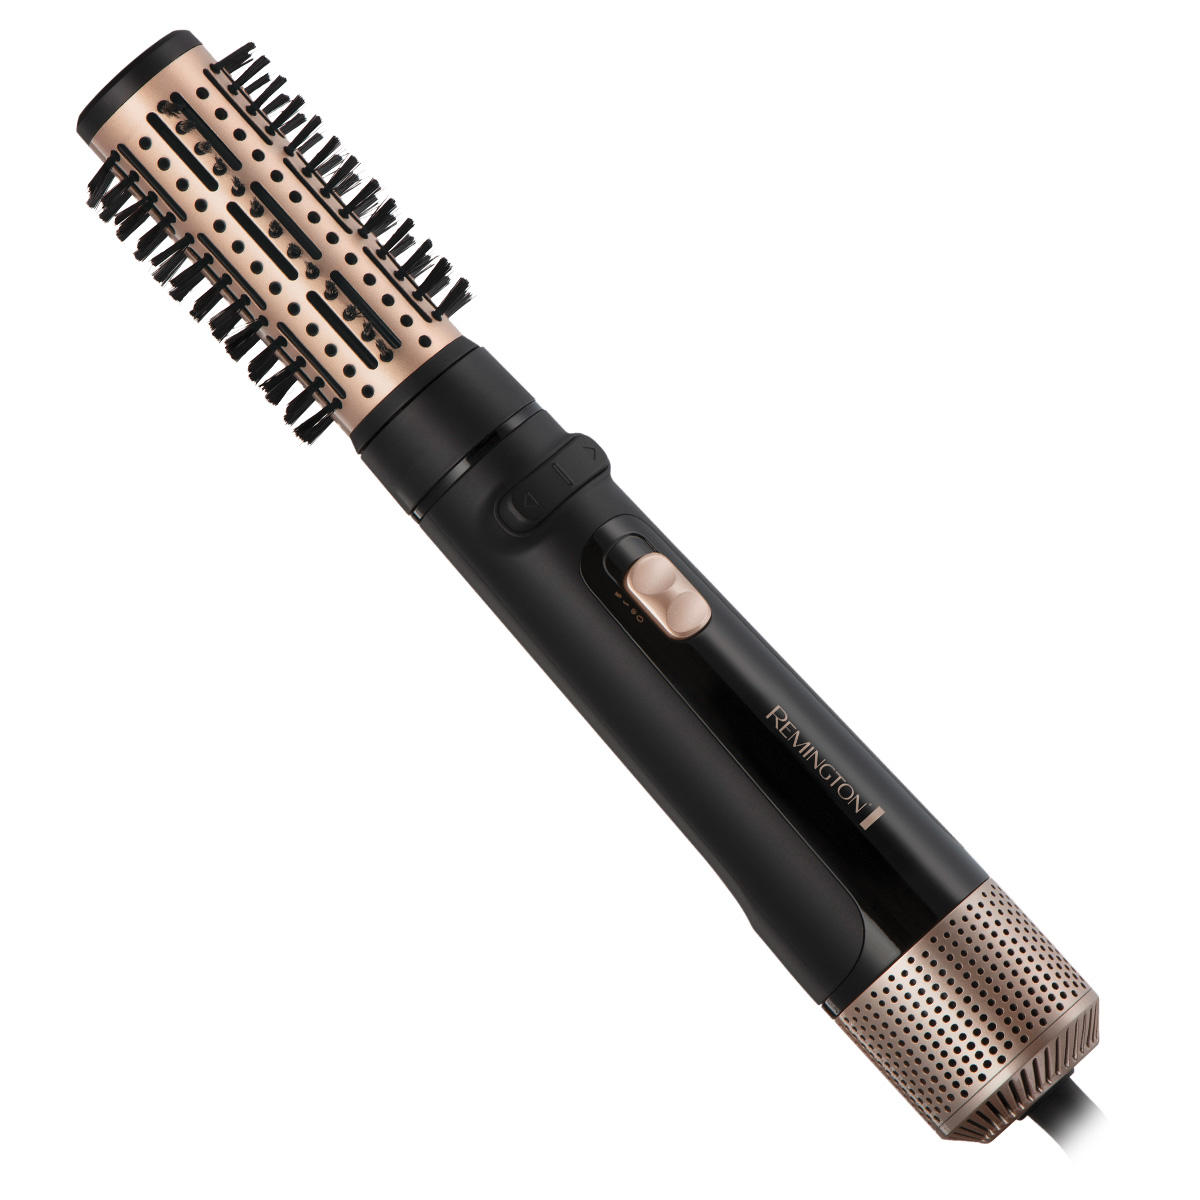 Remington AS7580 Blow Dry & Style Warm Air Brush  - 1